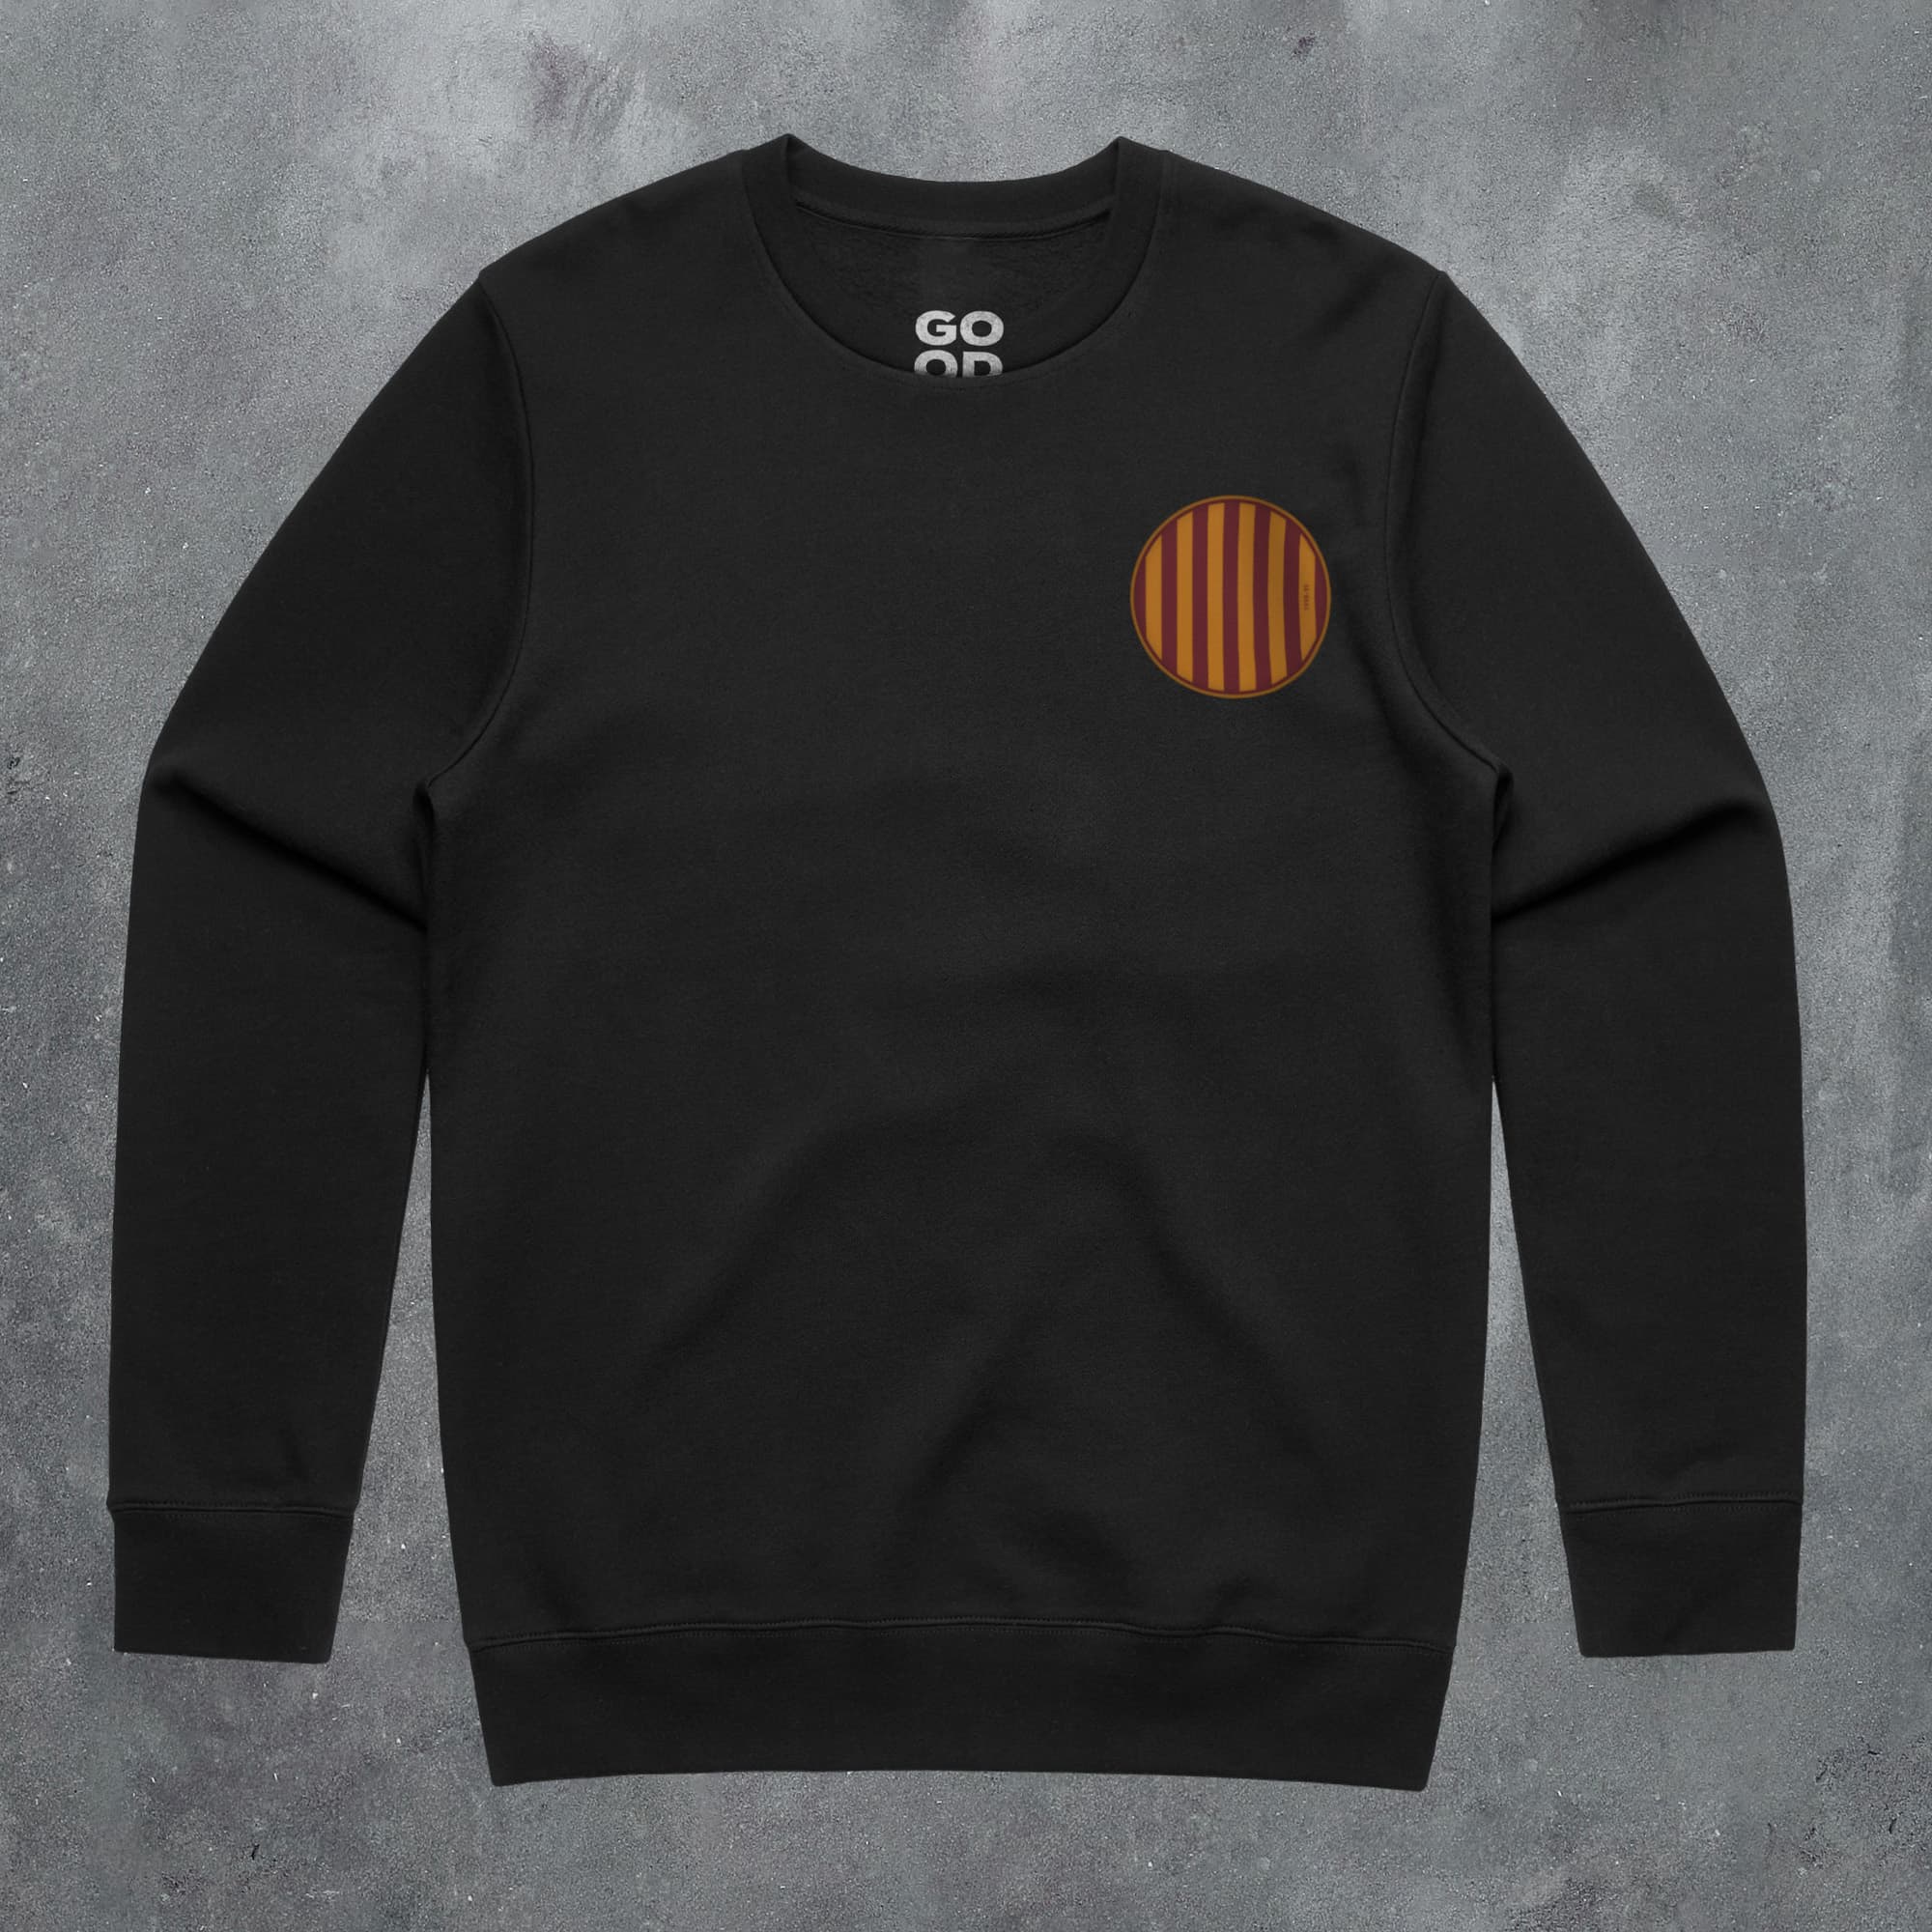 a black sweatshirt with an orange circle on the chest